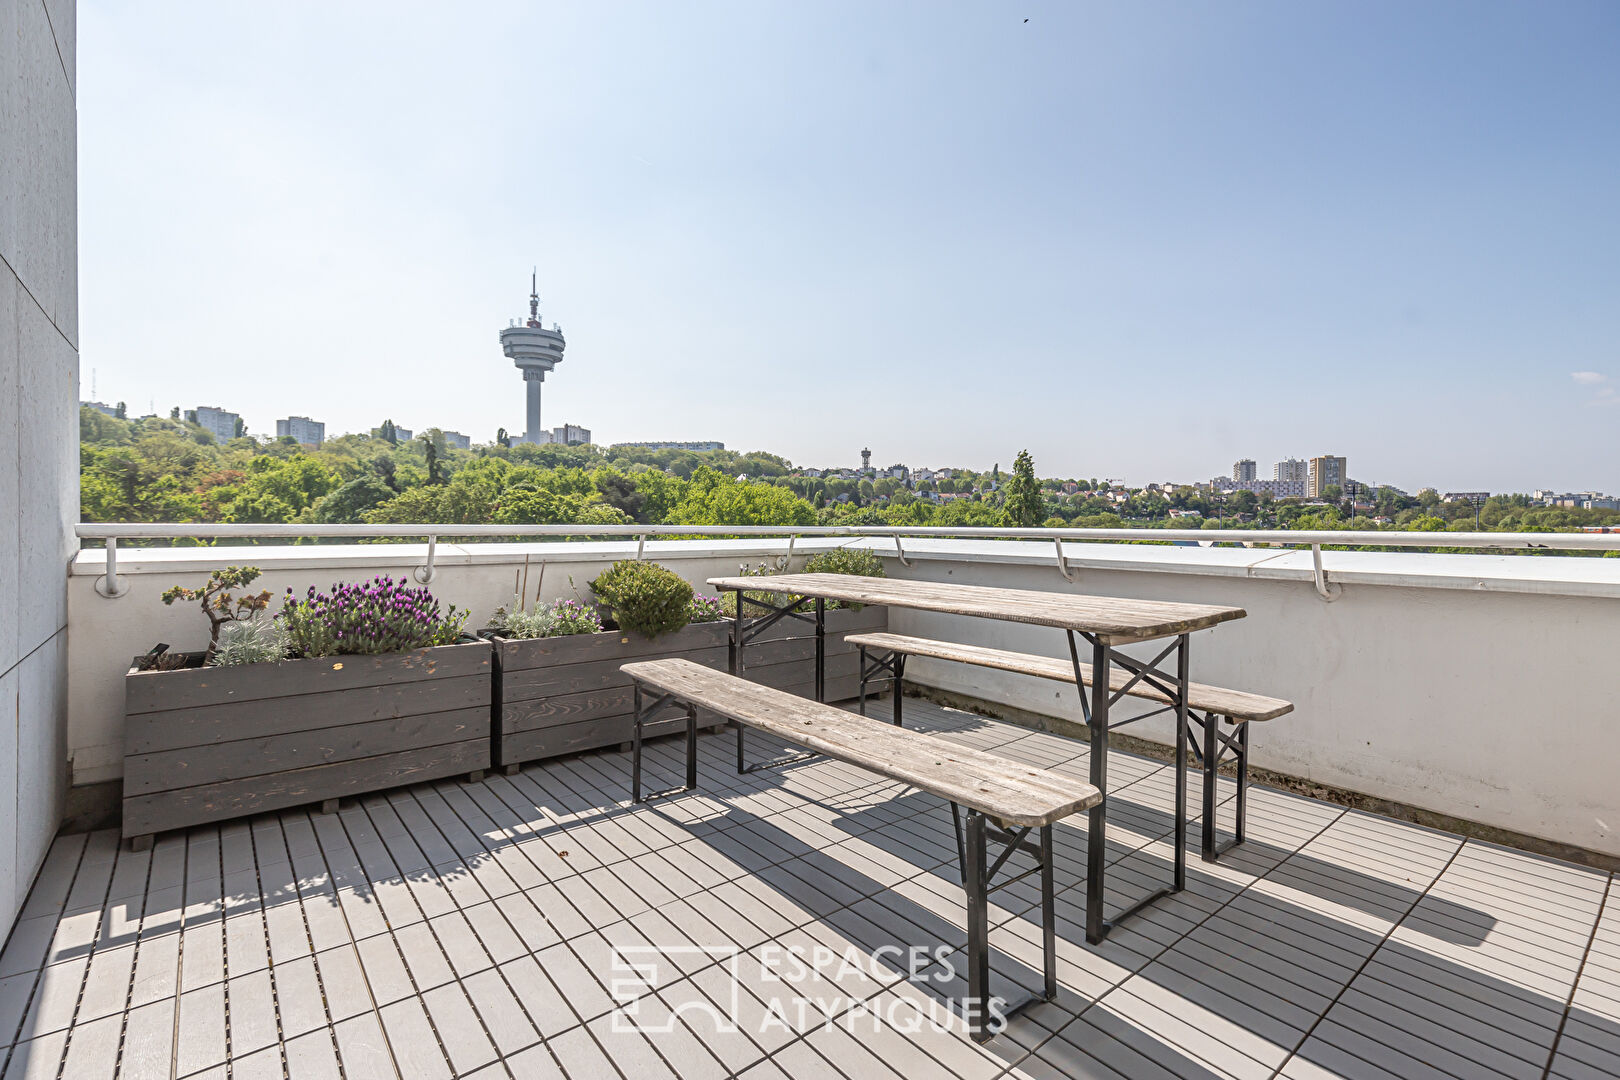 Apartment with terrace and panoramic view